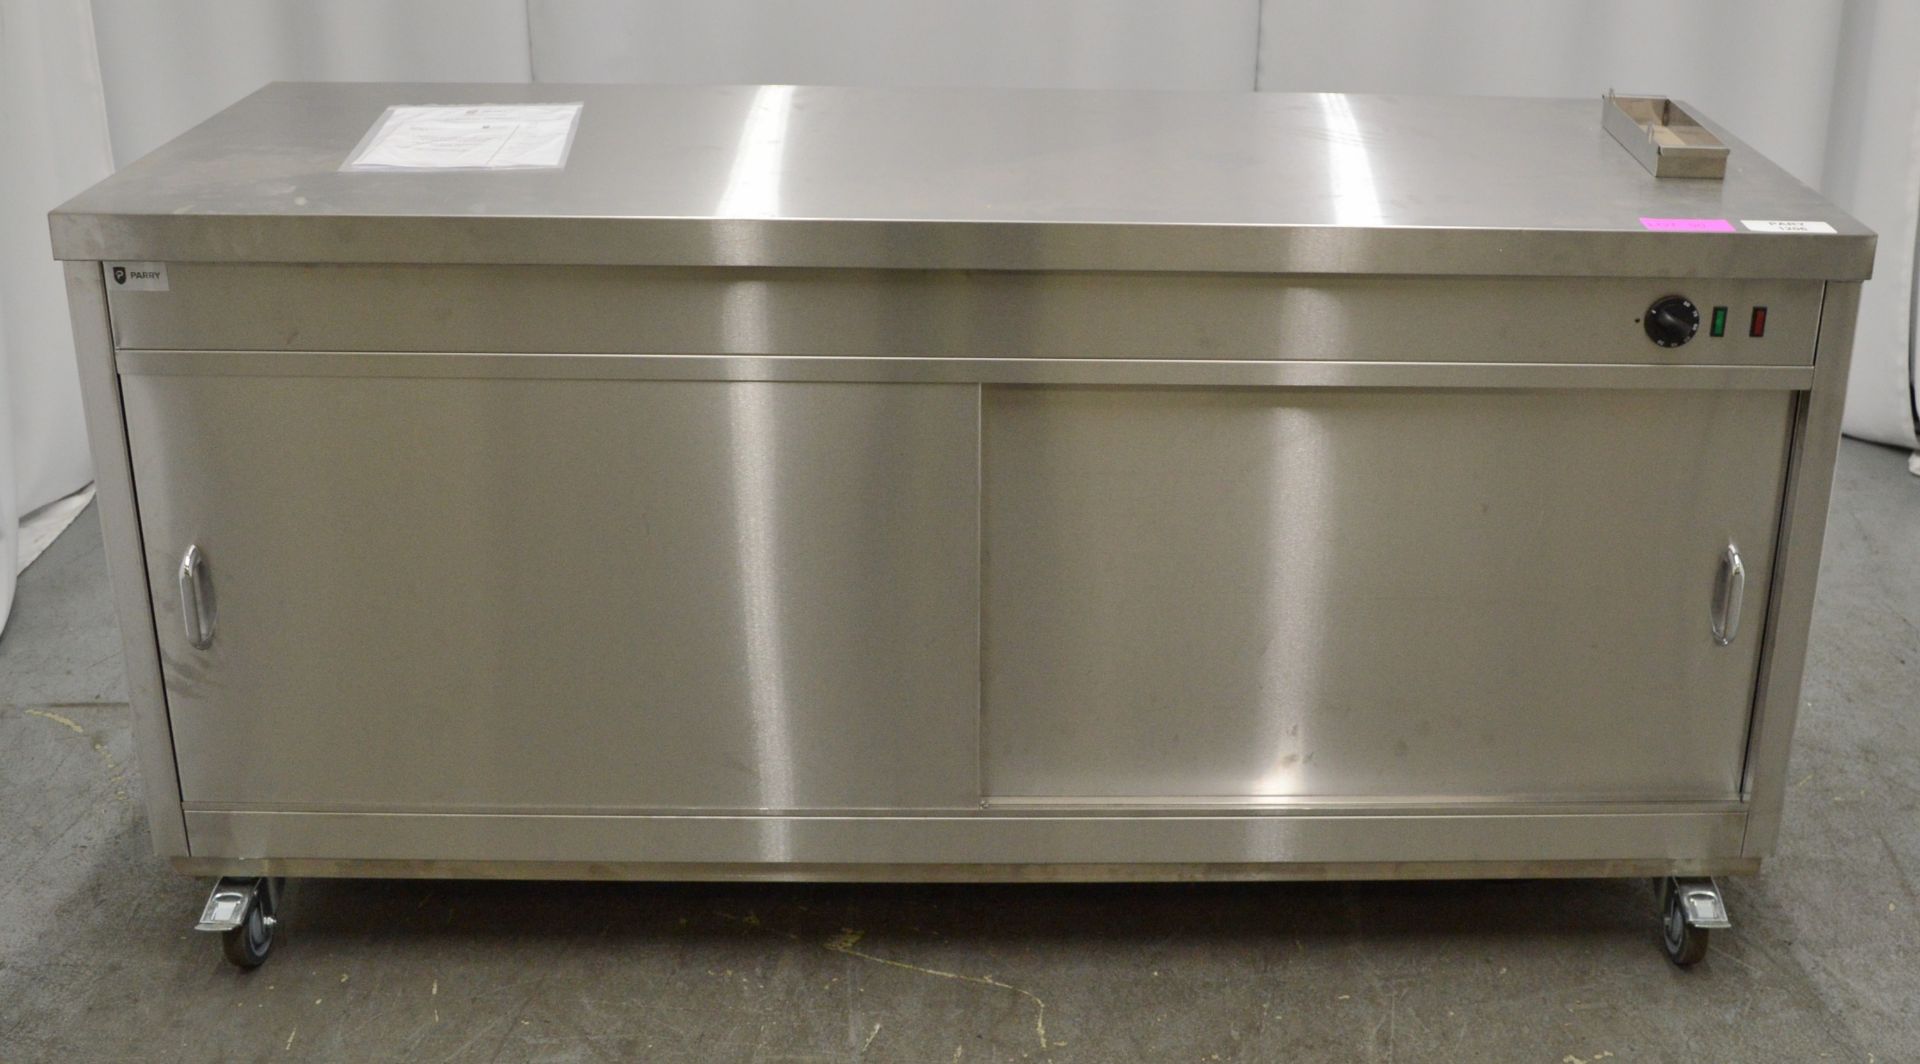 Parry HOT18 stainless steel hot cupboard, 1800x650x900mm (LxDxH) 230v